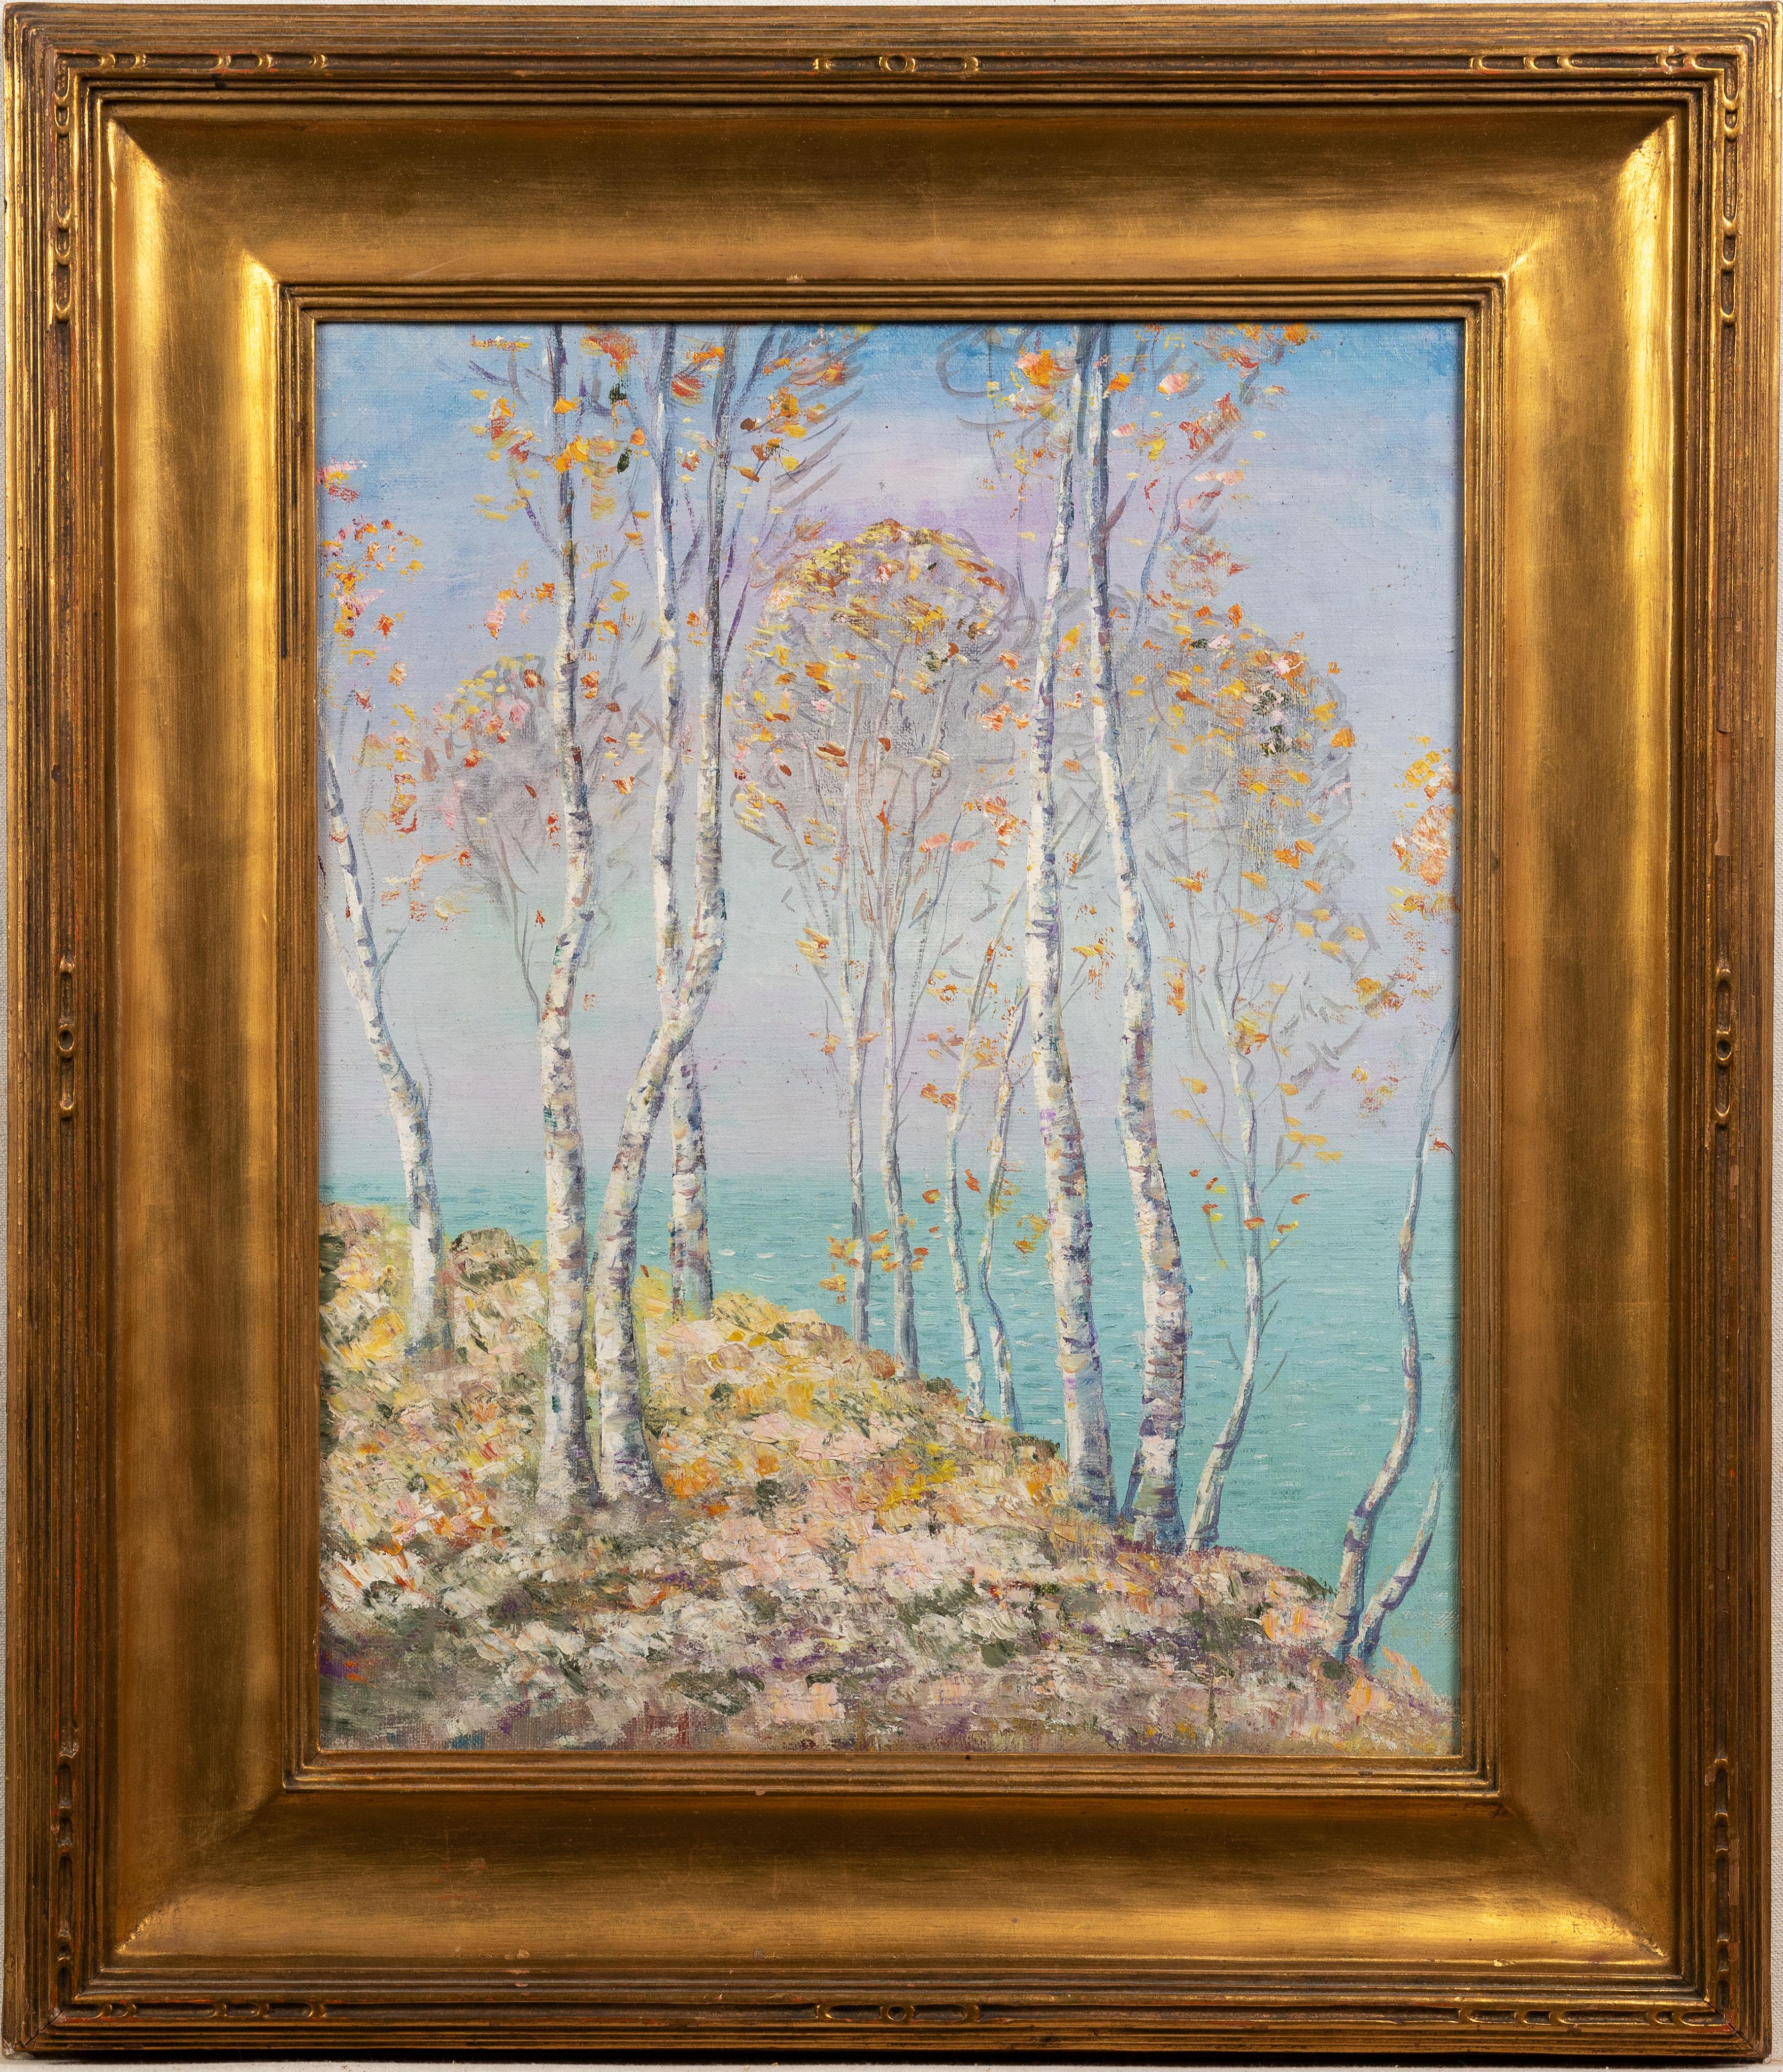 Antique American impressionist landscape oil painting.  Oil on canvas.  Framed in a period arts and crafts giltwood frame.  Image size, 20H x 16L.